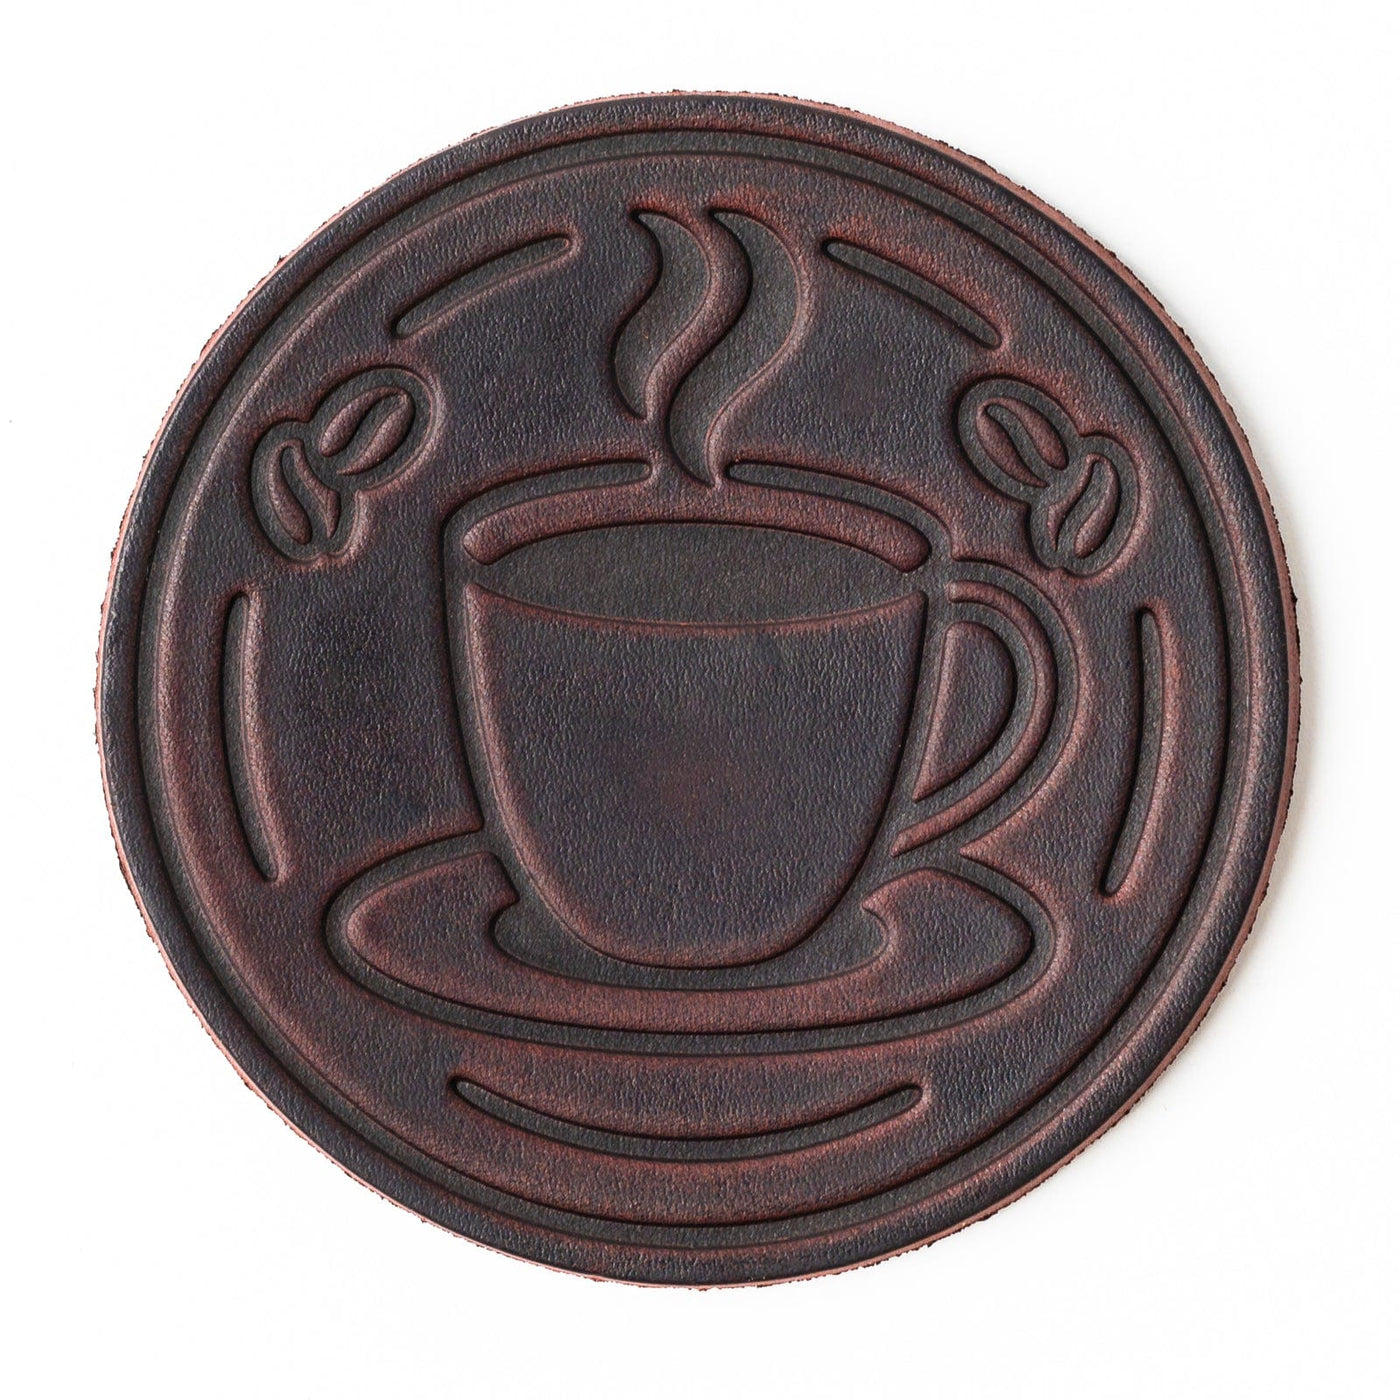 Leather Coasters 4 Pack - Coffee - Oxblood Popov Leather®